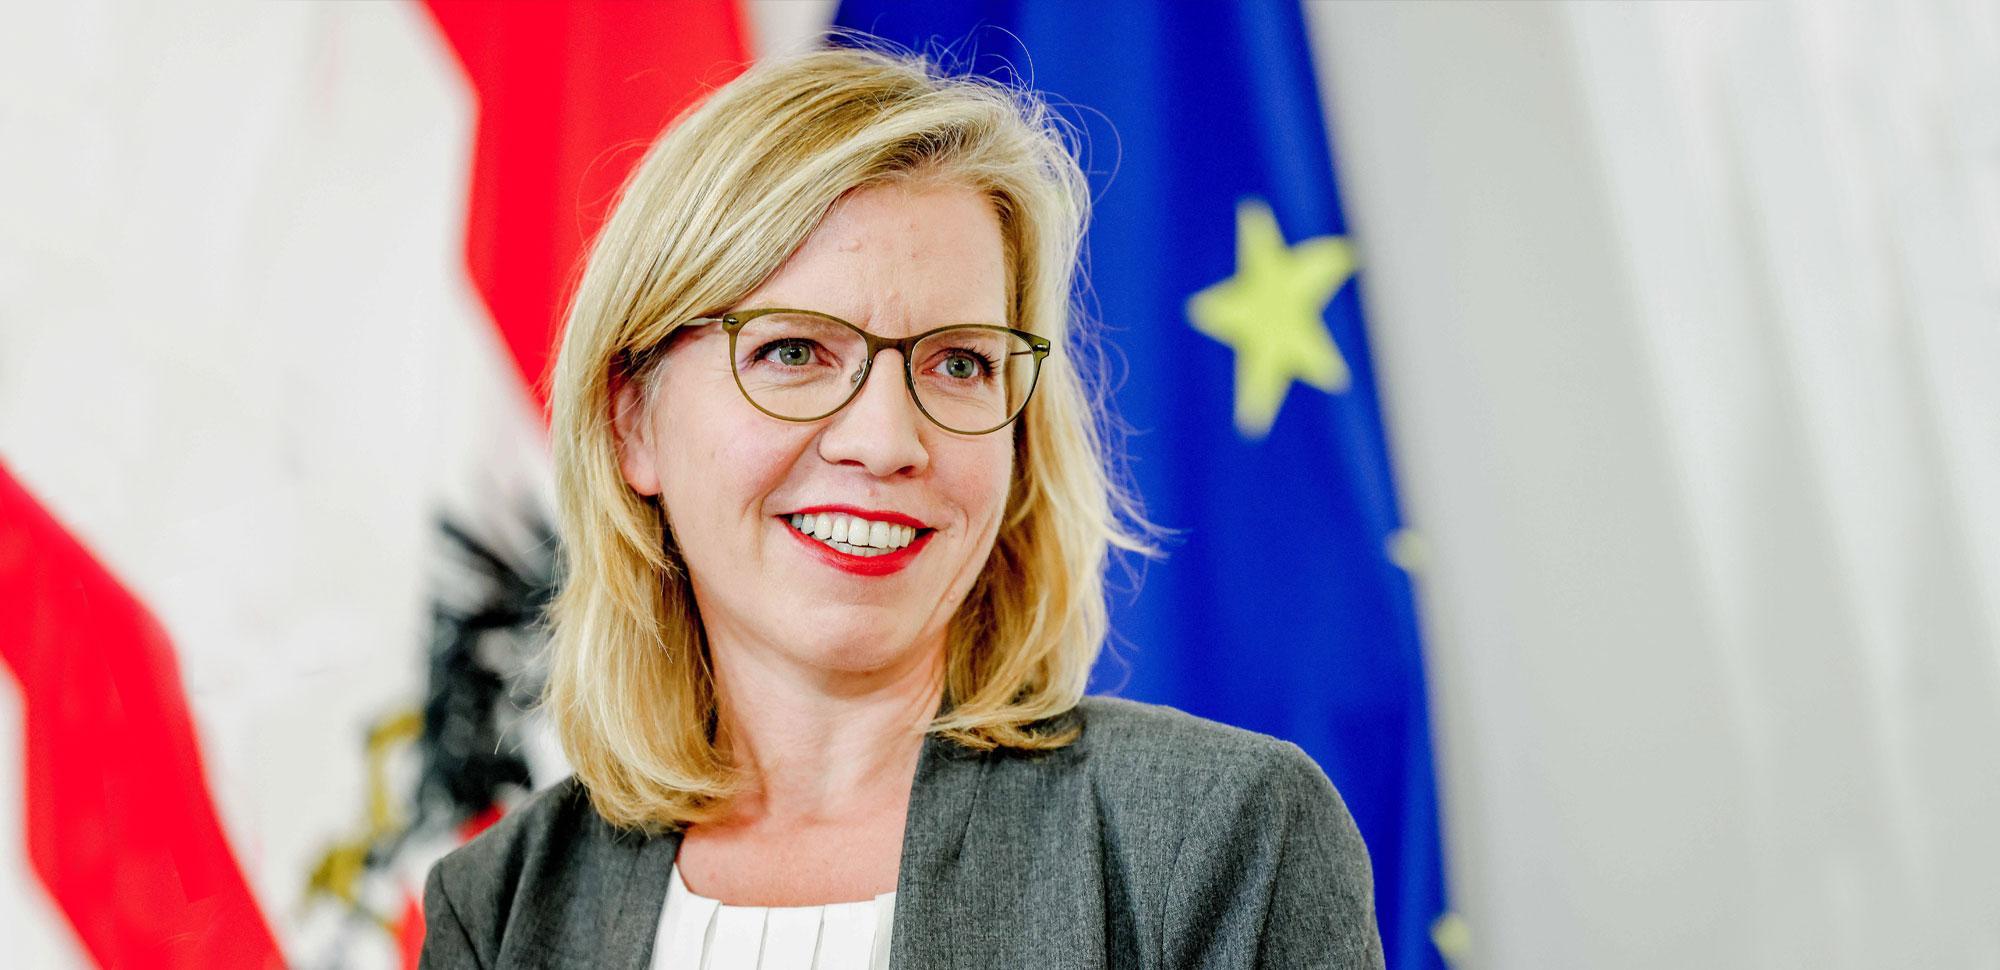 Leonore Gewessler Up Close: Interview With Austria’s Federal Minister For Climate Action, Environment, Energy, Mobility, Innovation And Technology